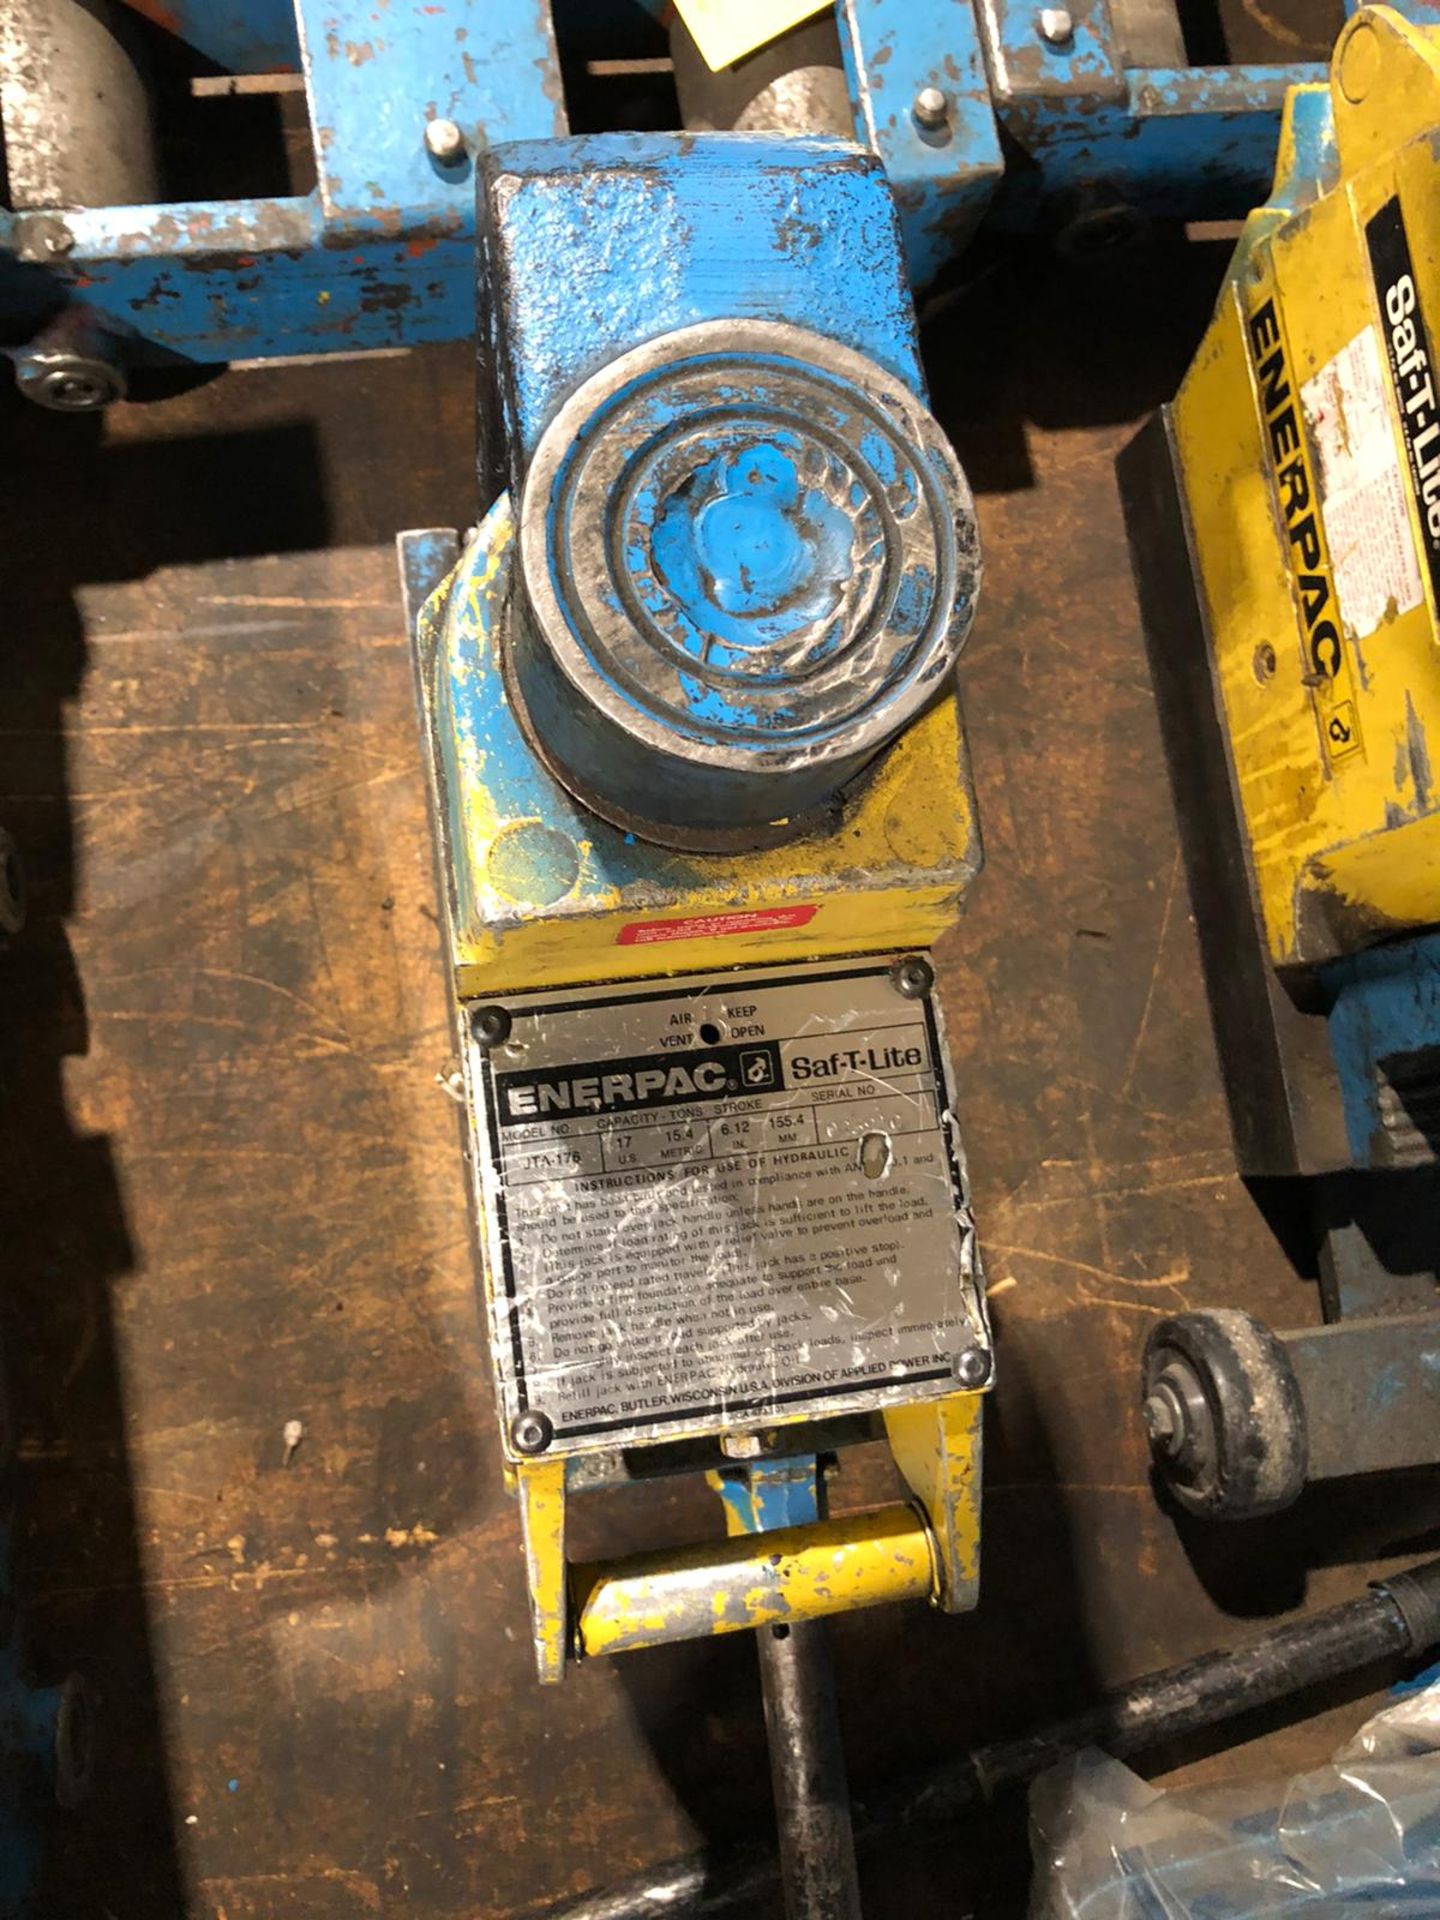 Enerpac Hydraulic TOE JACK Unit - 16 Ton Capacity - Saf-T-Lite model JTA-176*** FROM 5-STAR RIGGING - Image 3 of 3